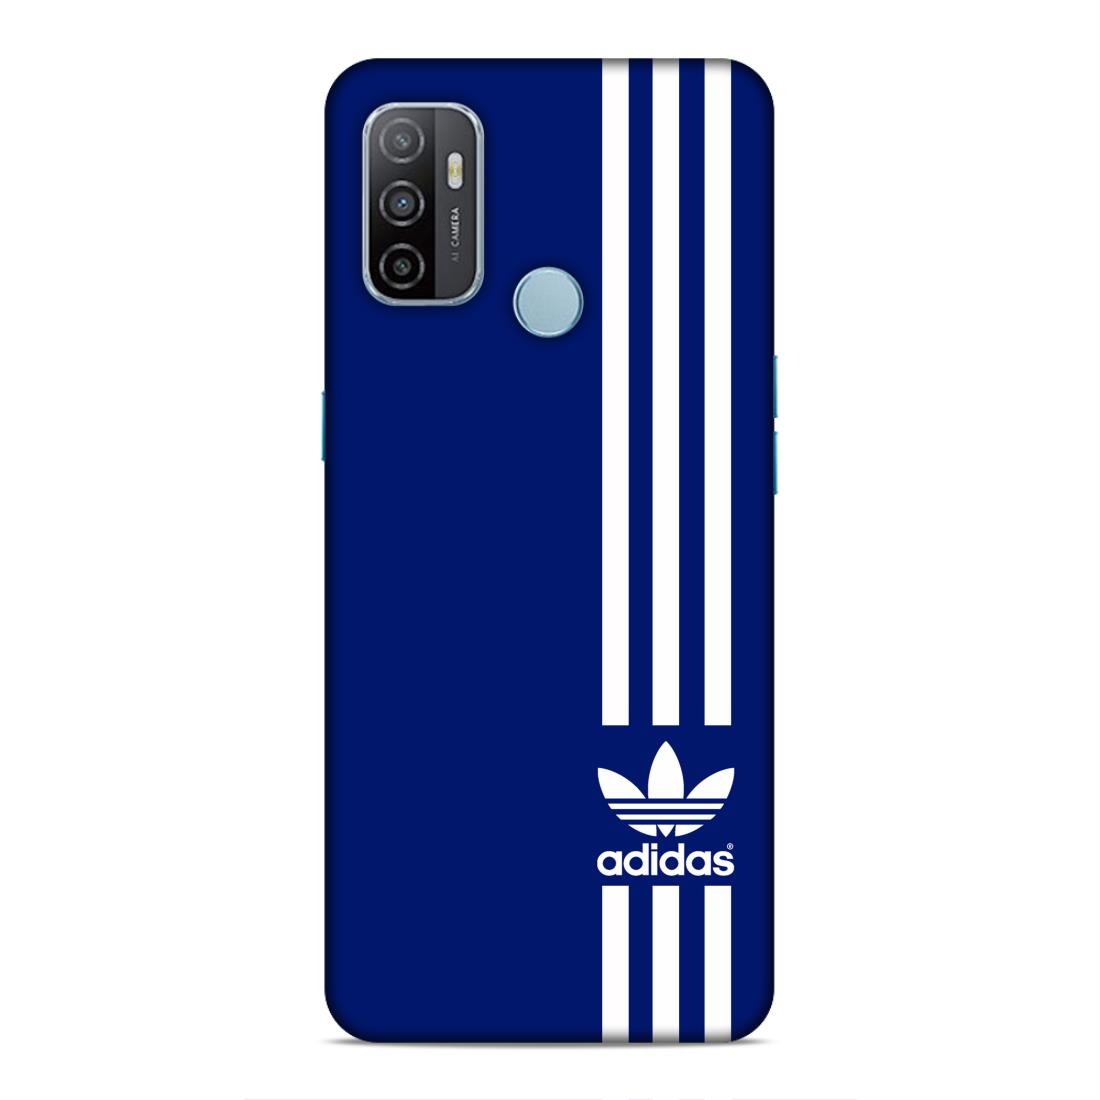 Adidas in Blue Hard Back Case For Oppo A33 2020 / A53 2020